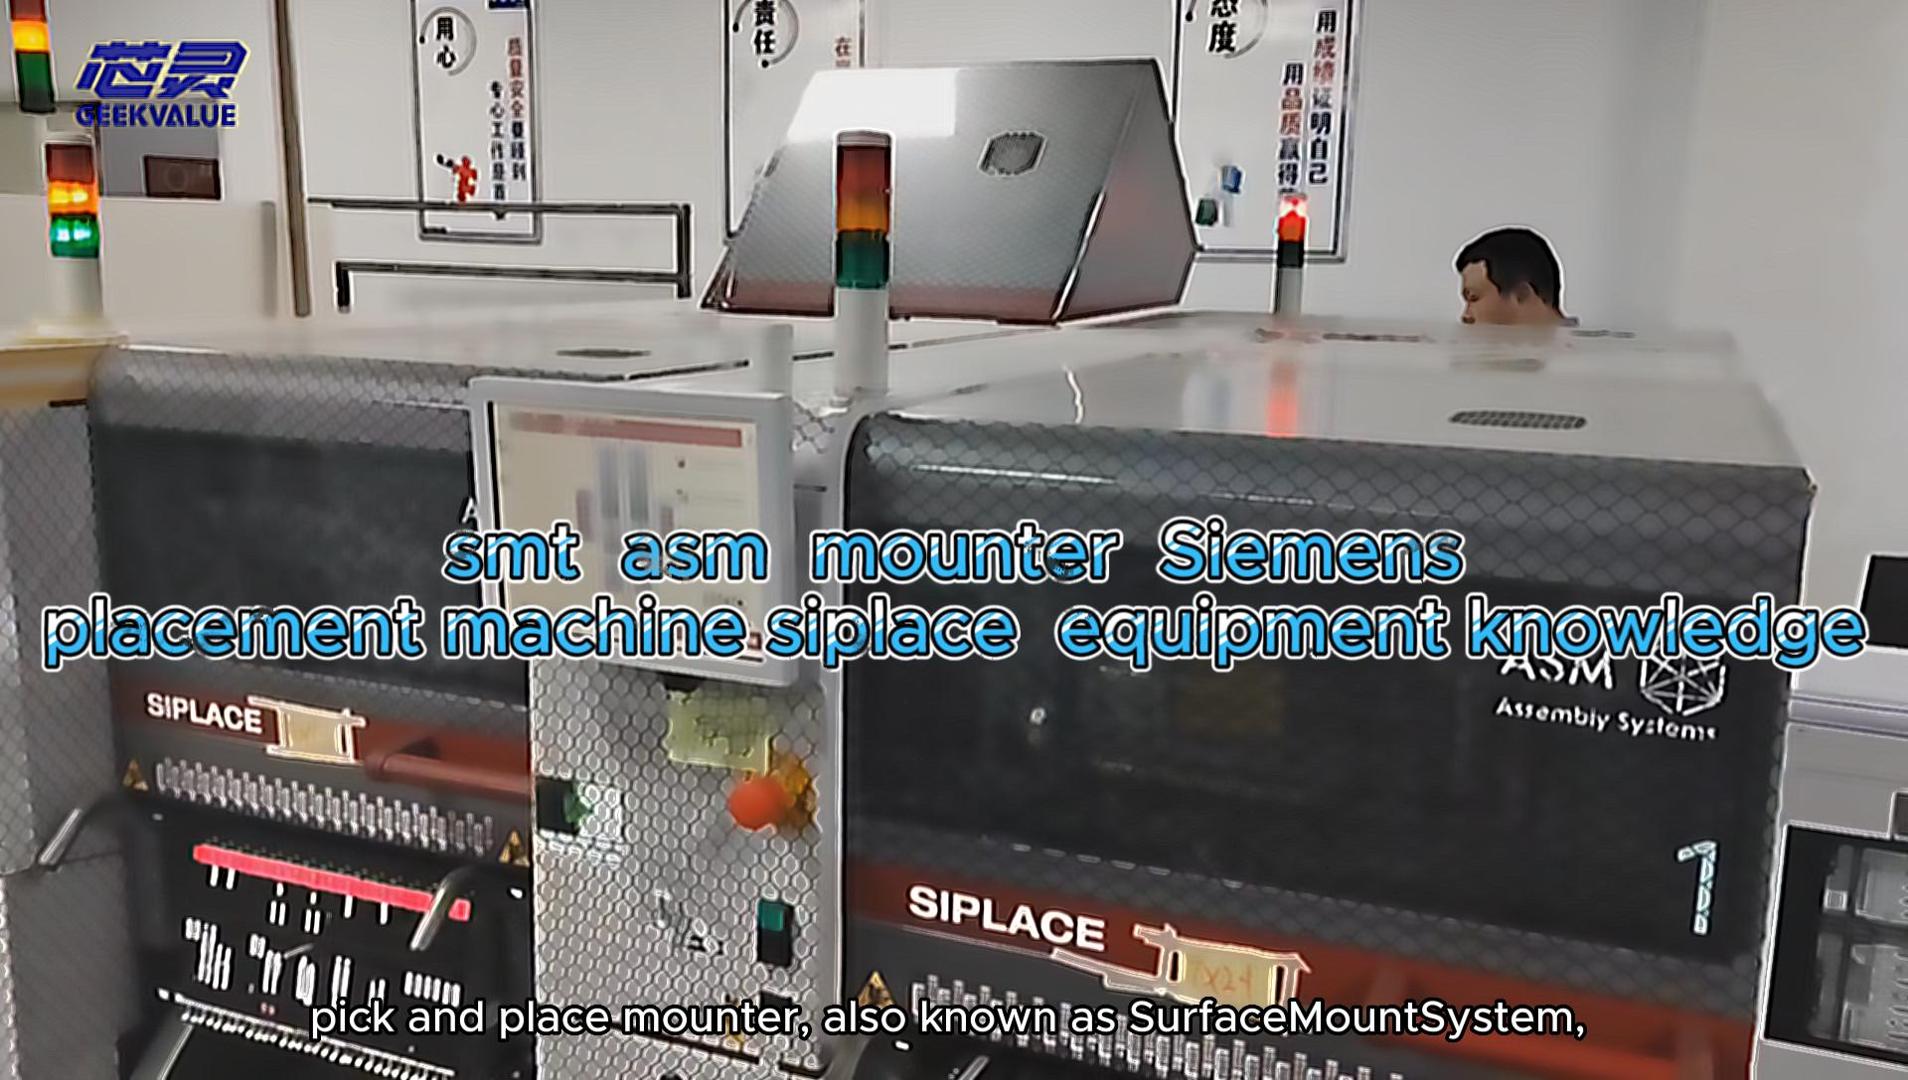 smt pick and place mounter knowledge-asm siplace placement machine/siemens asm  smt chip equiment